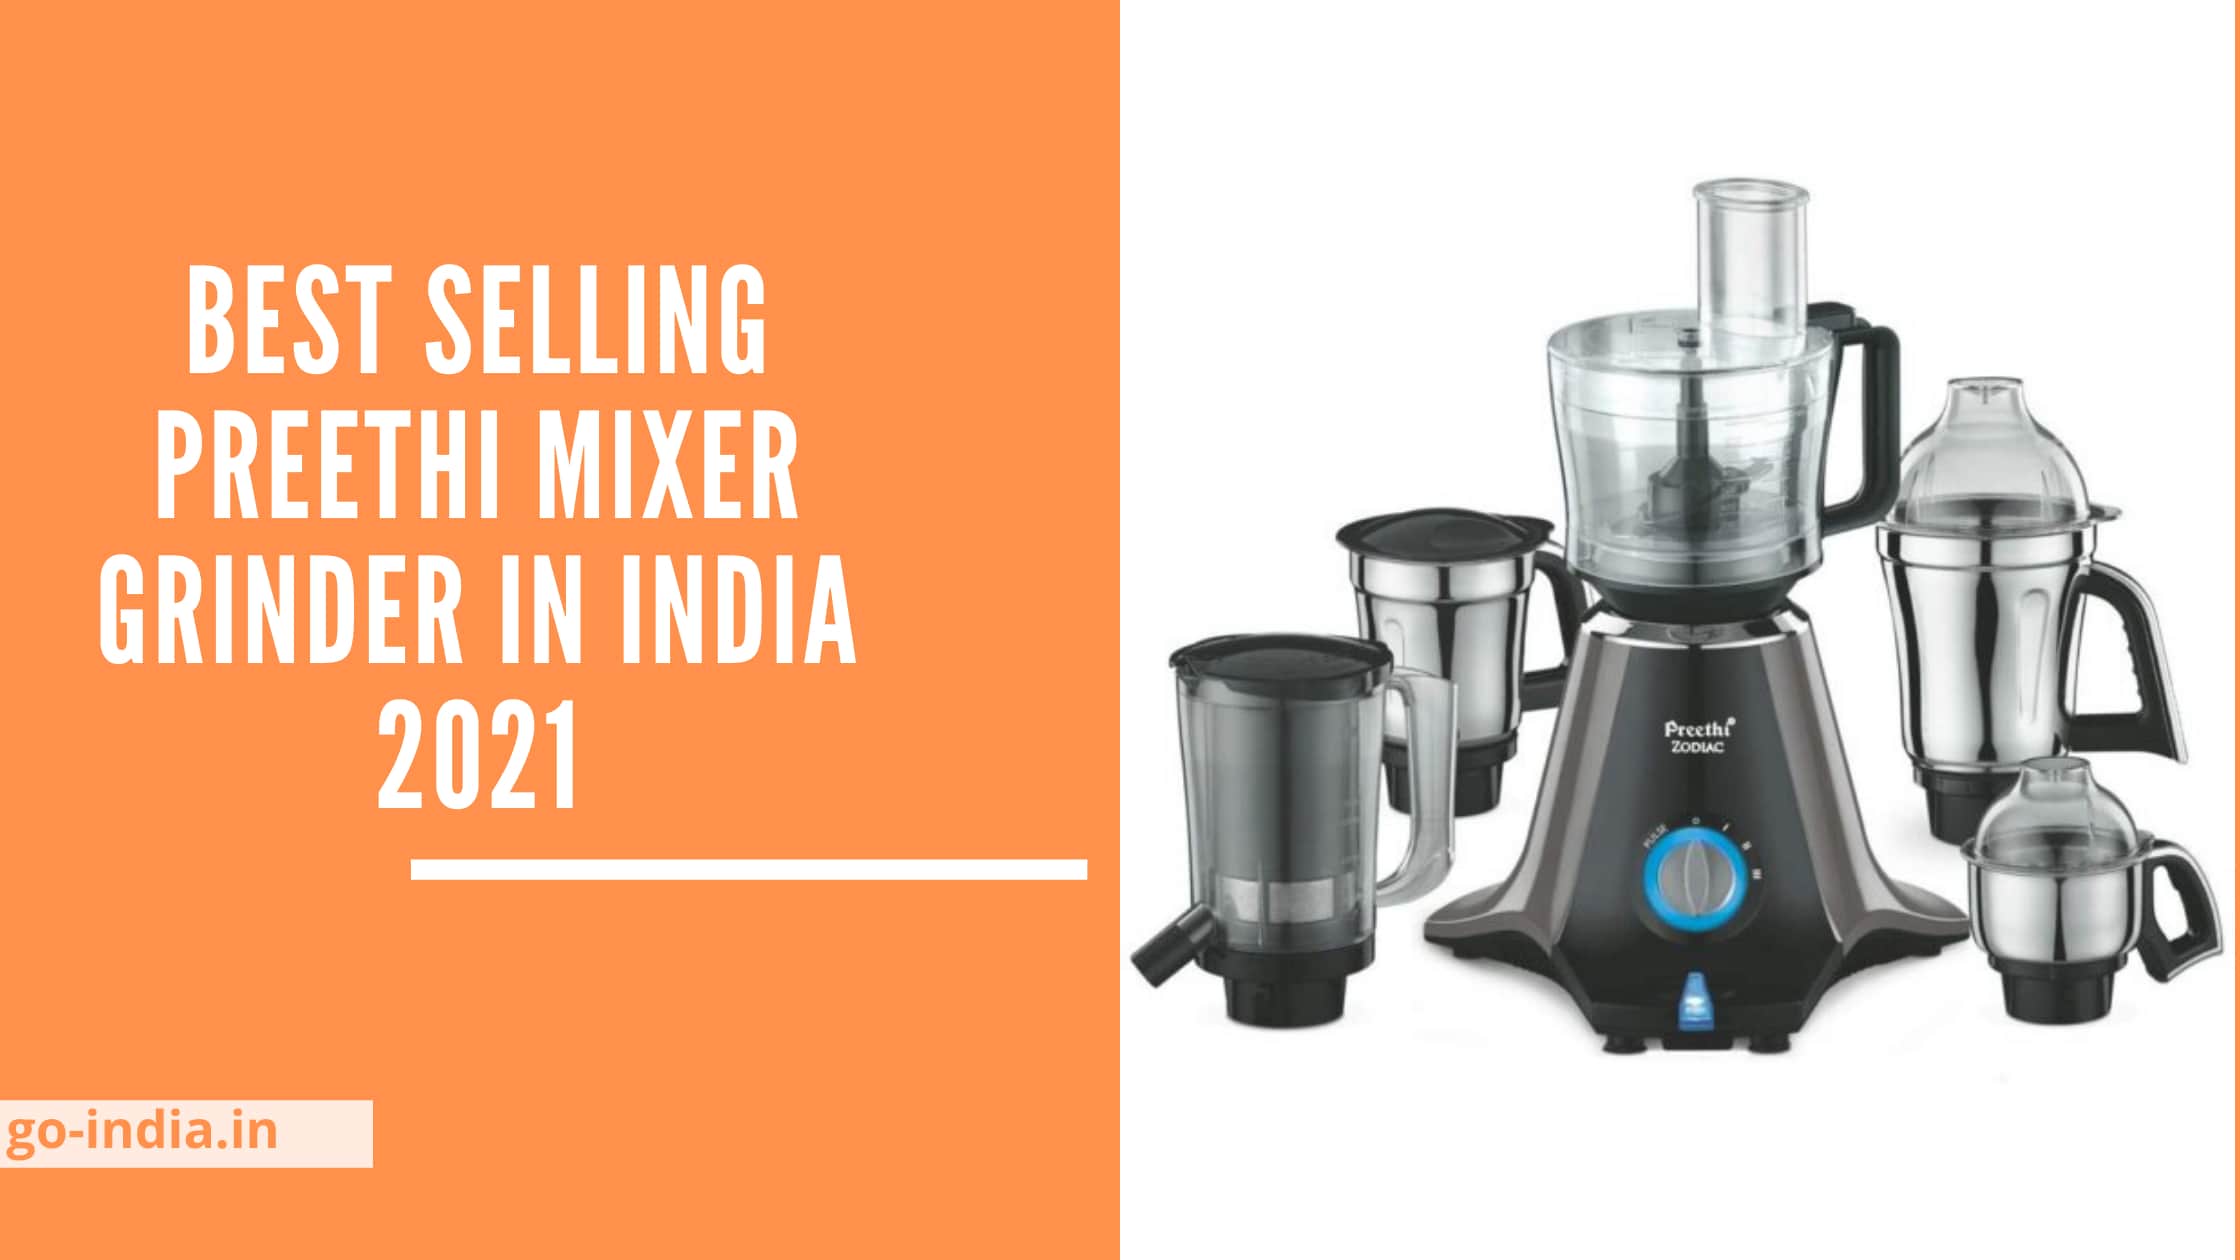 Best Selling Preethi Mixer Grinder in India